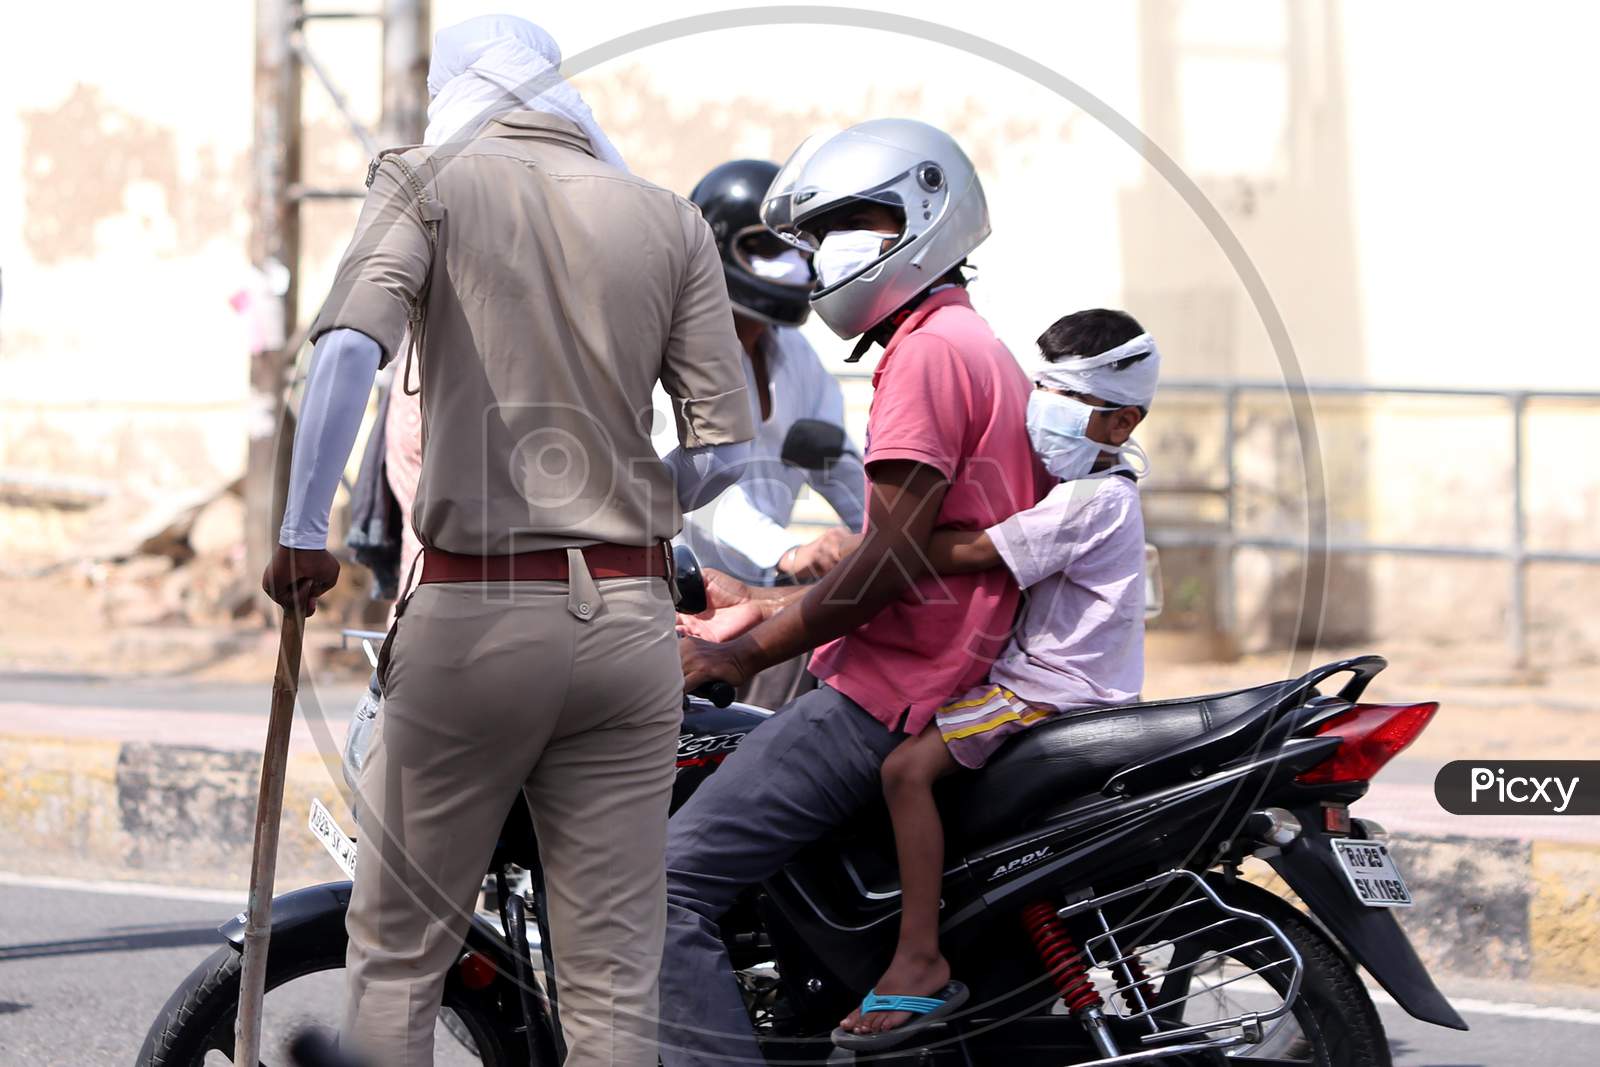 Indian Policemen Inspect Vehicles At A Checkpoint During A Government-Imposed Nationwide Lockdown As A Preventive Measure Against The Spread Of The Covid-19 Coronavirus In Ajmer, Rajasthan, India On 01 May , 2020.